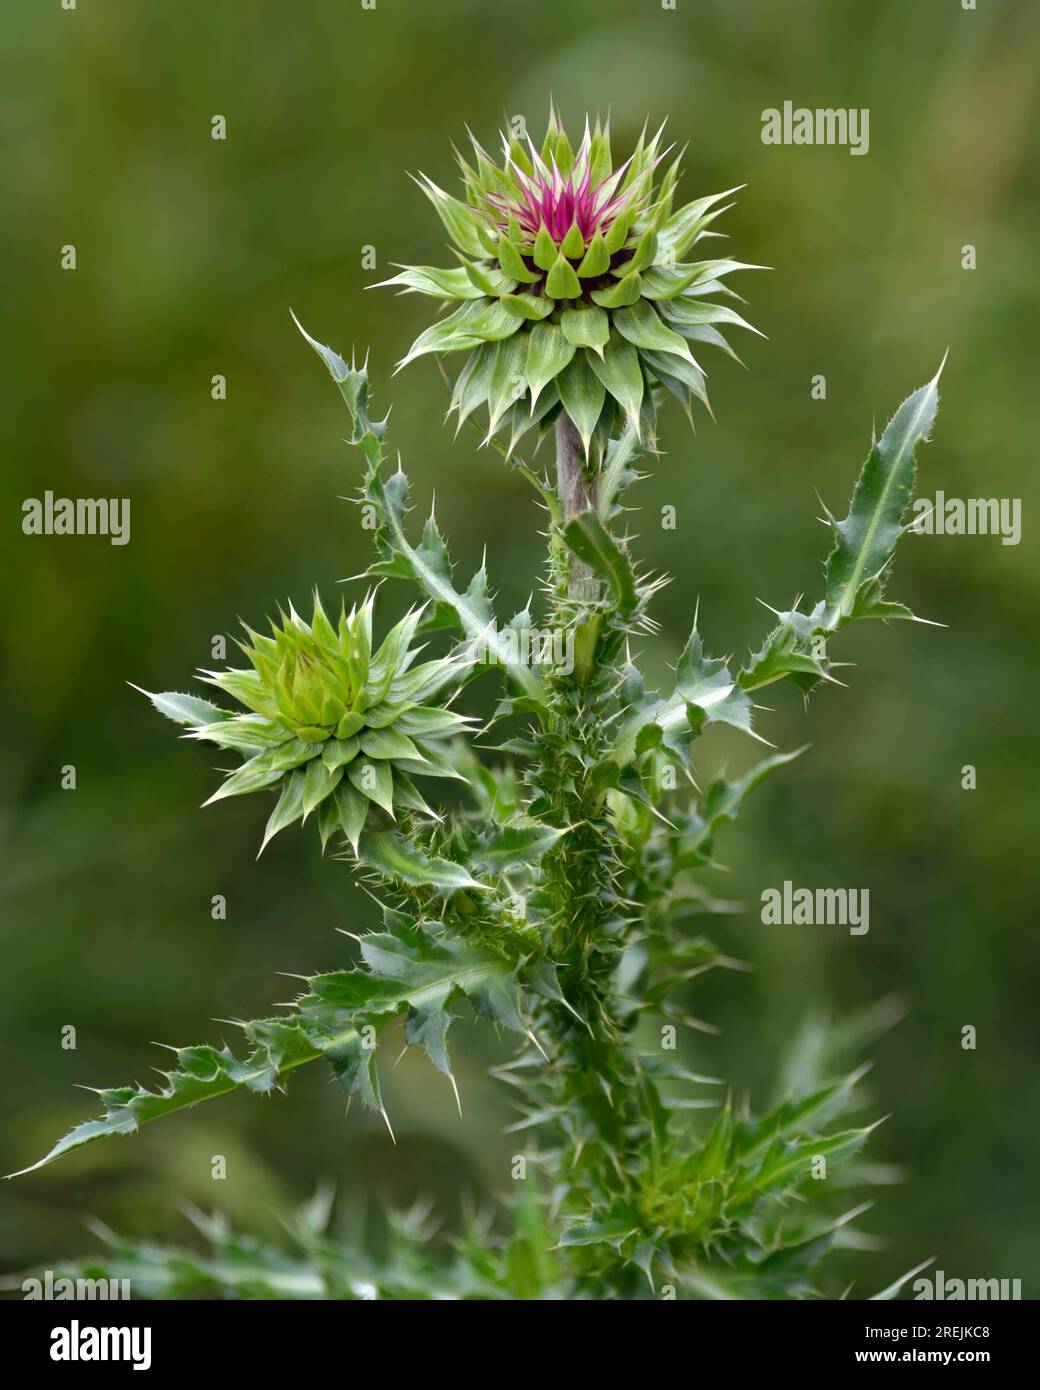 Nodding Thistle (Carduus nutans), an invasive weed, also known as musk thistle photographed on a soft green background. National flower of Scotland. Stock Photo